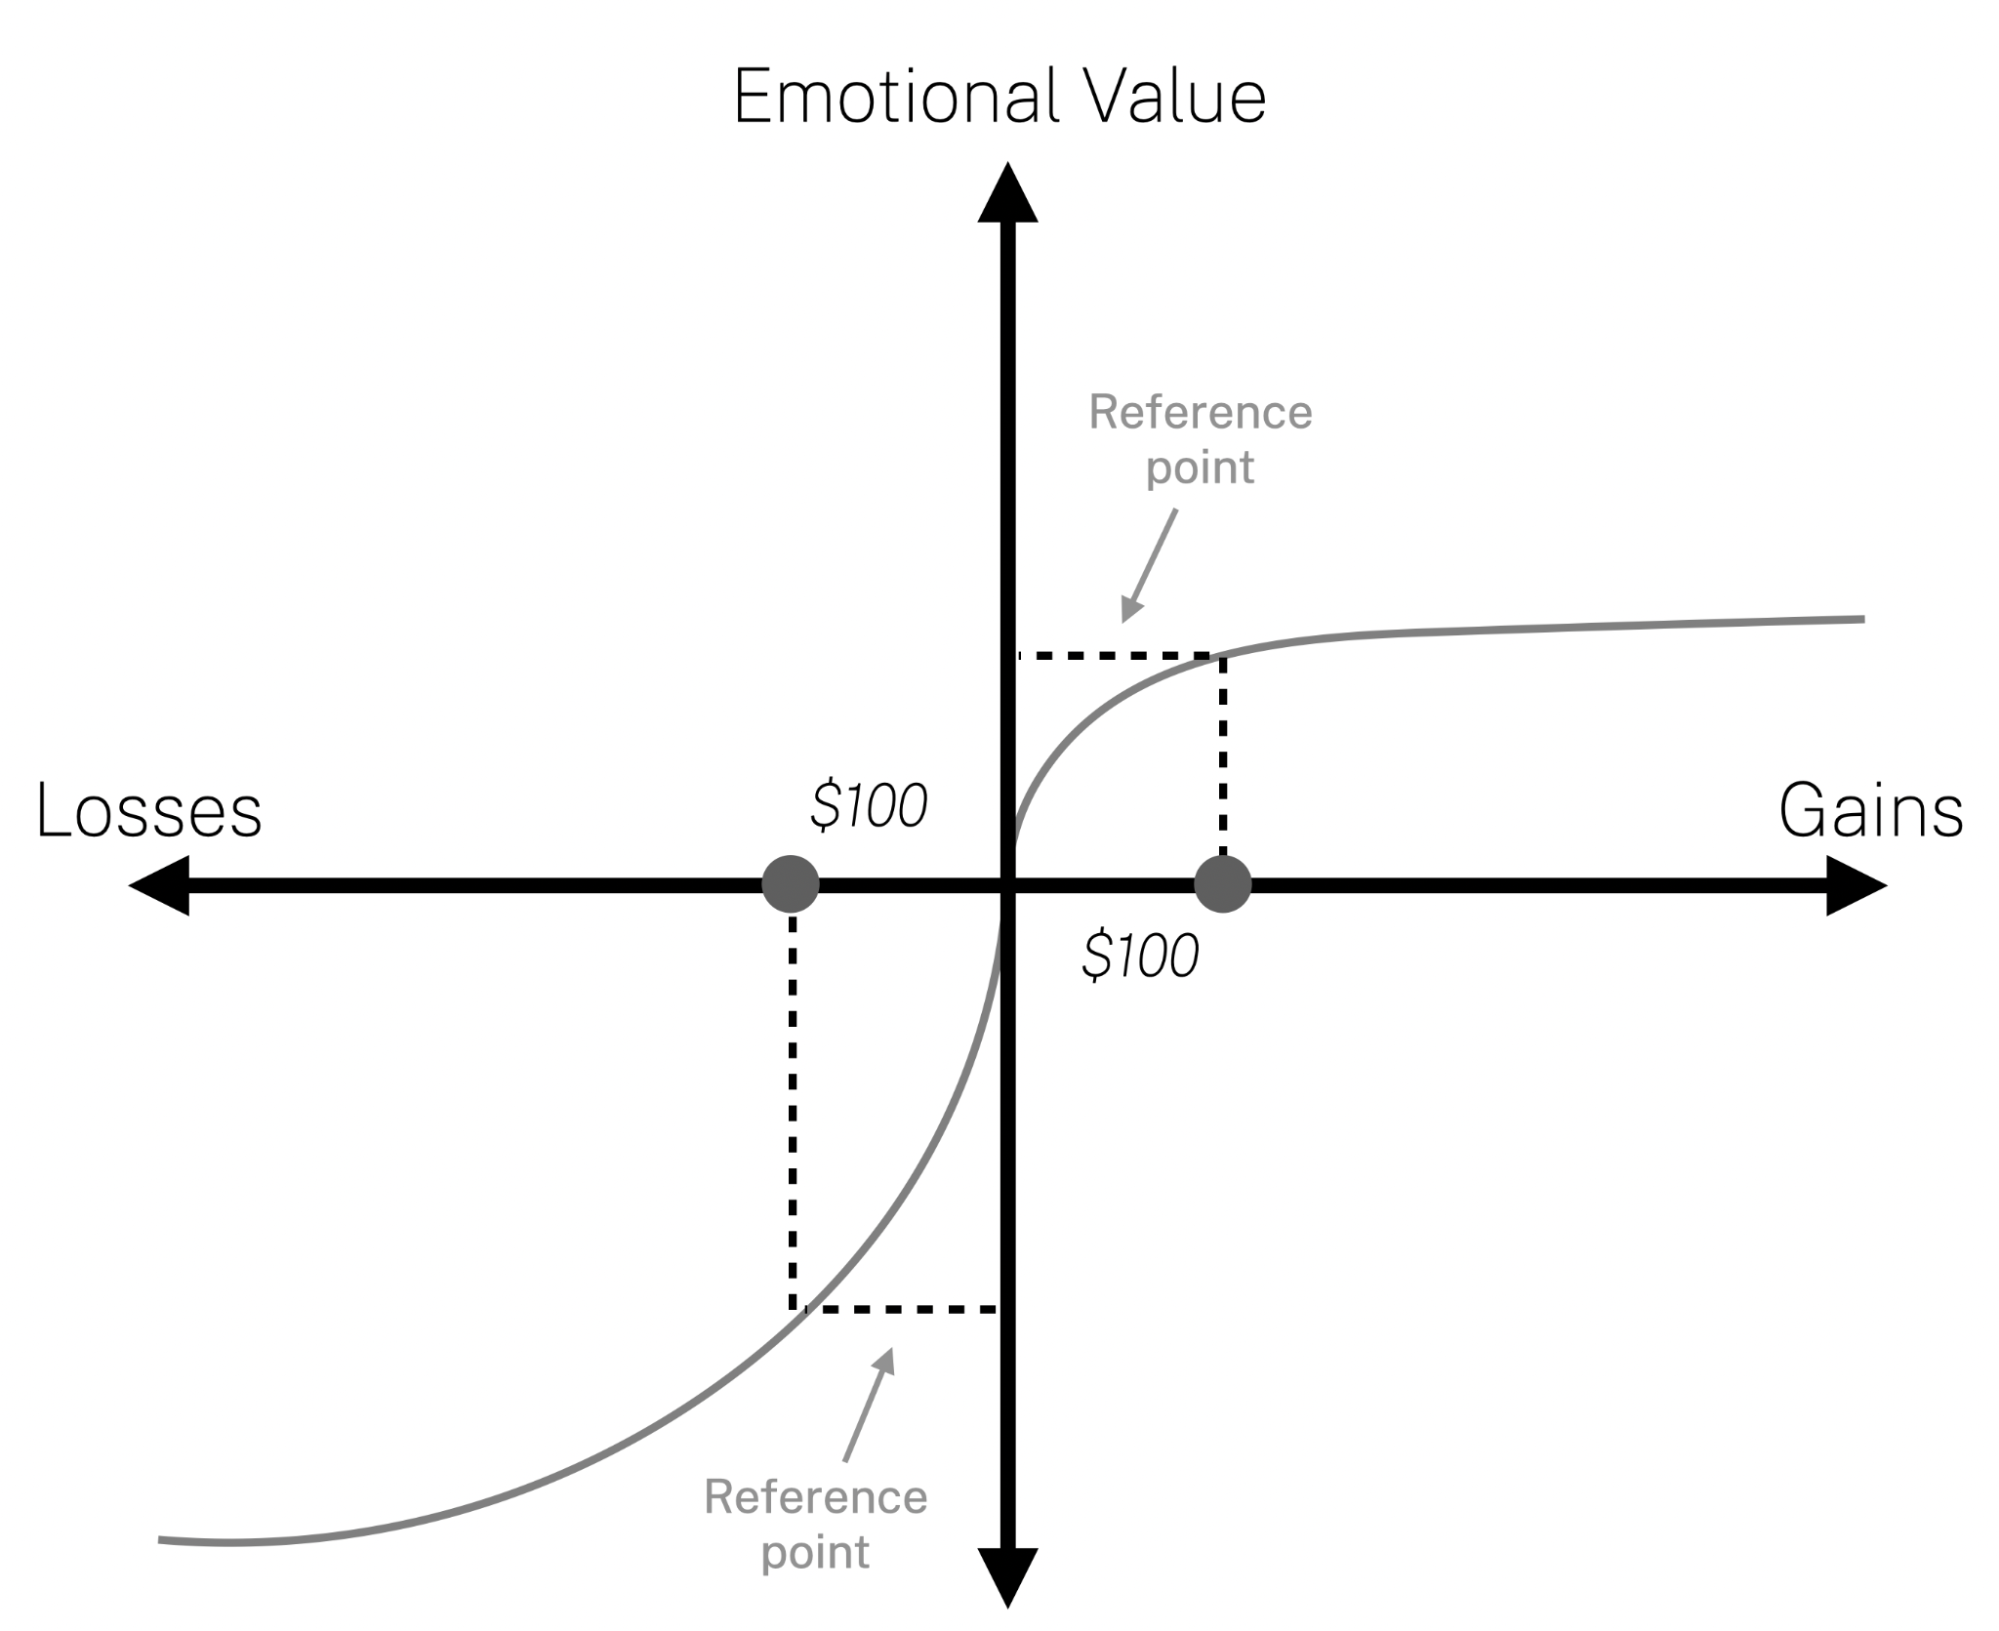 Risk aversion in relationt to the Value Function (Prospect Theory).